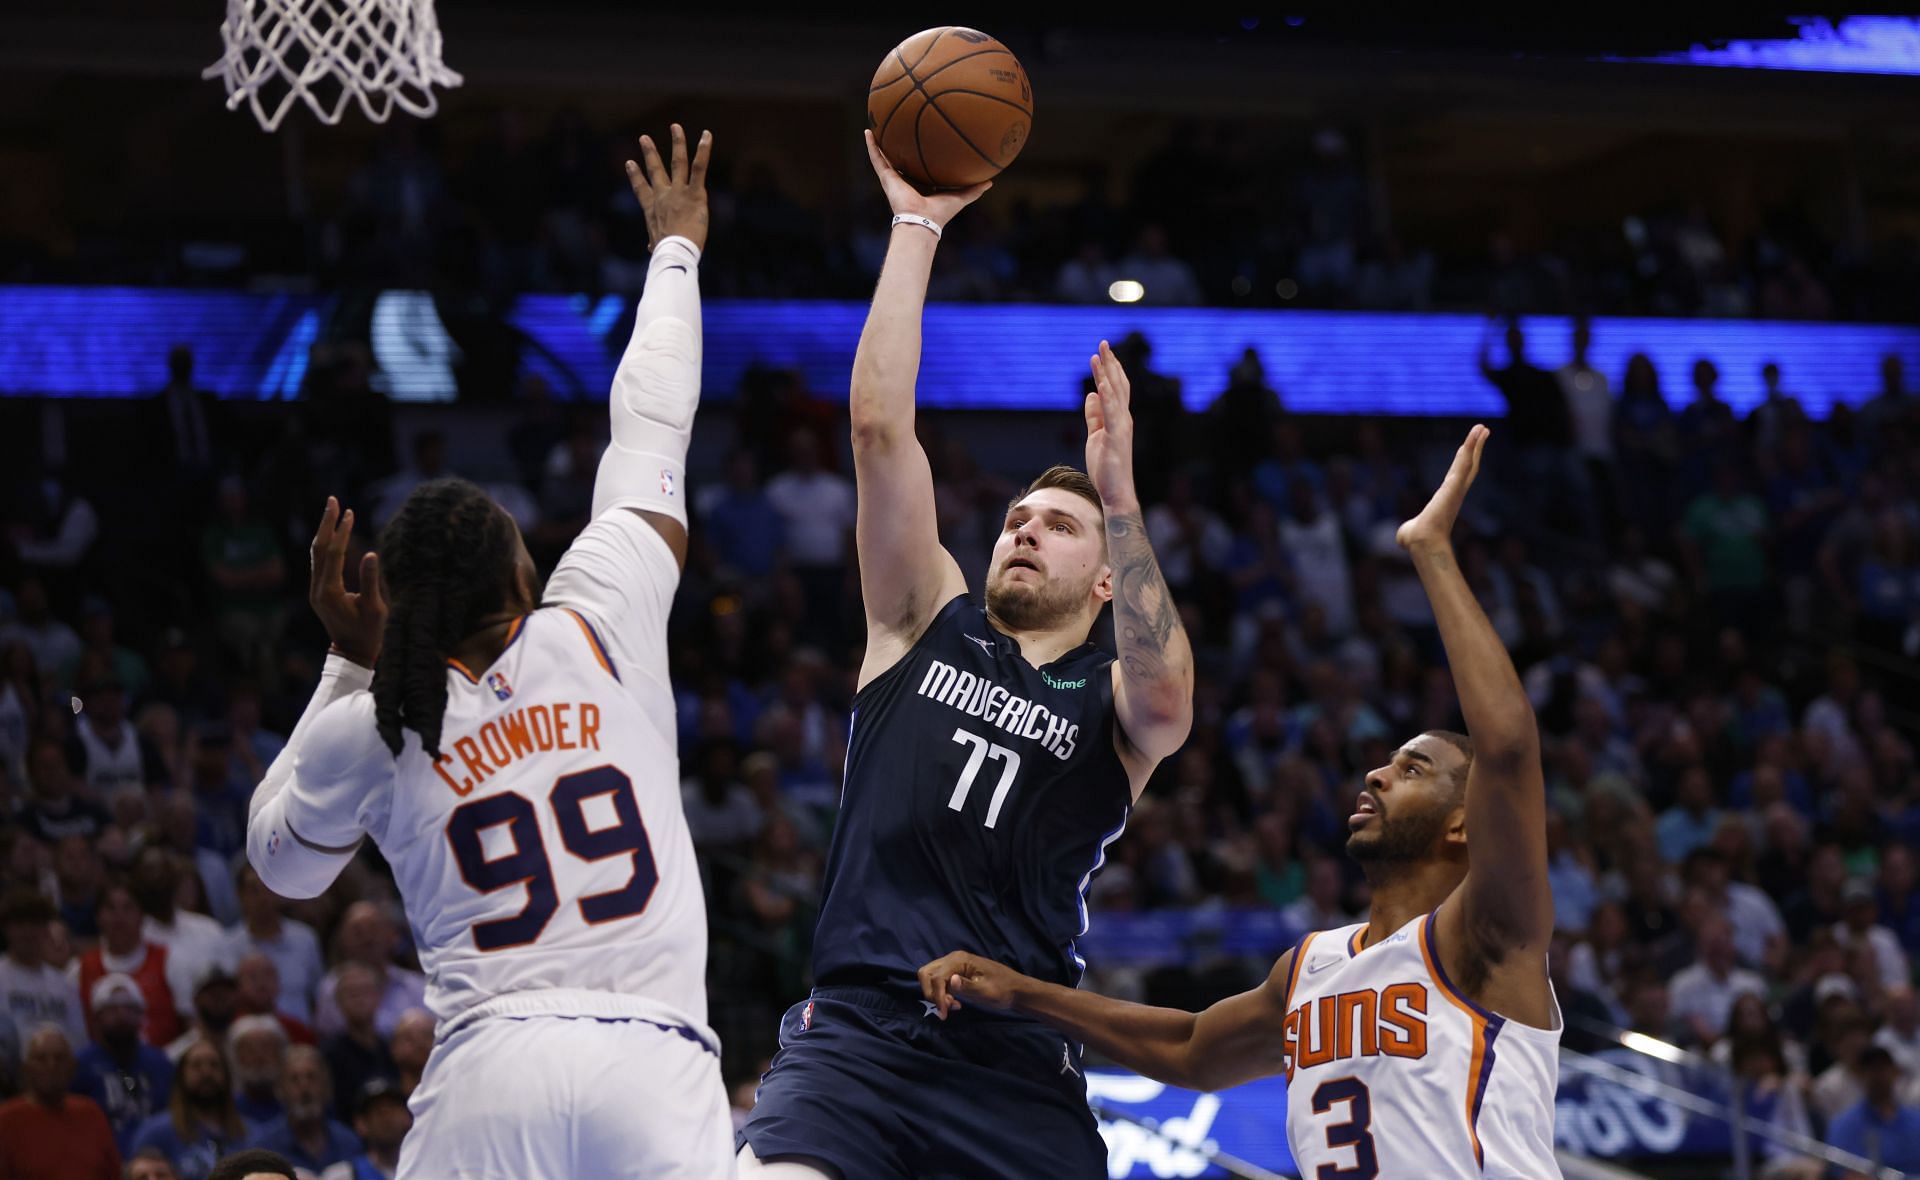 Luka Doncic #77 of the Dallas Mavericks shoots the ball against the Phoenix Suns during Game Six of the 2022 NBA Playoffs Western Conference Semifinals at American Airlines Center on May 12, 2022 in Dallas, Texas.